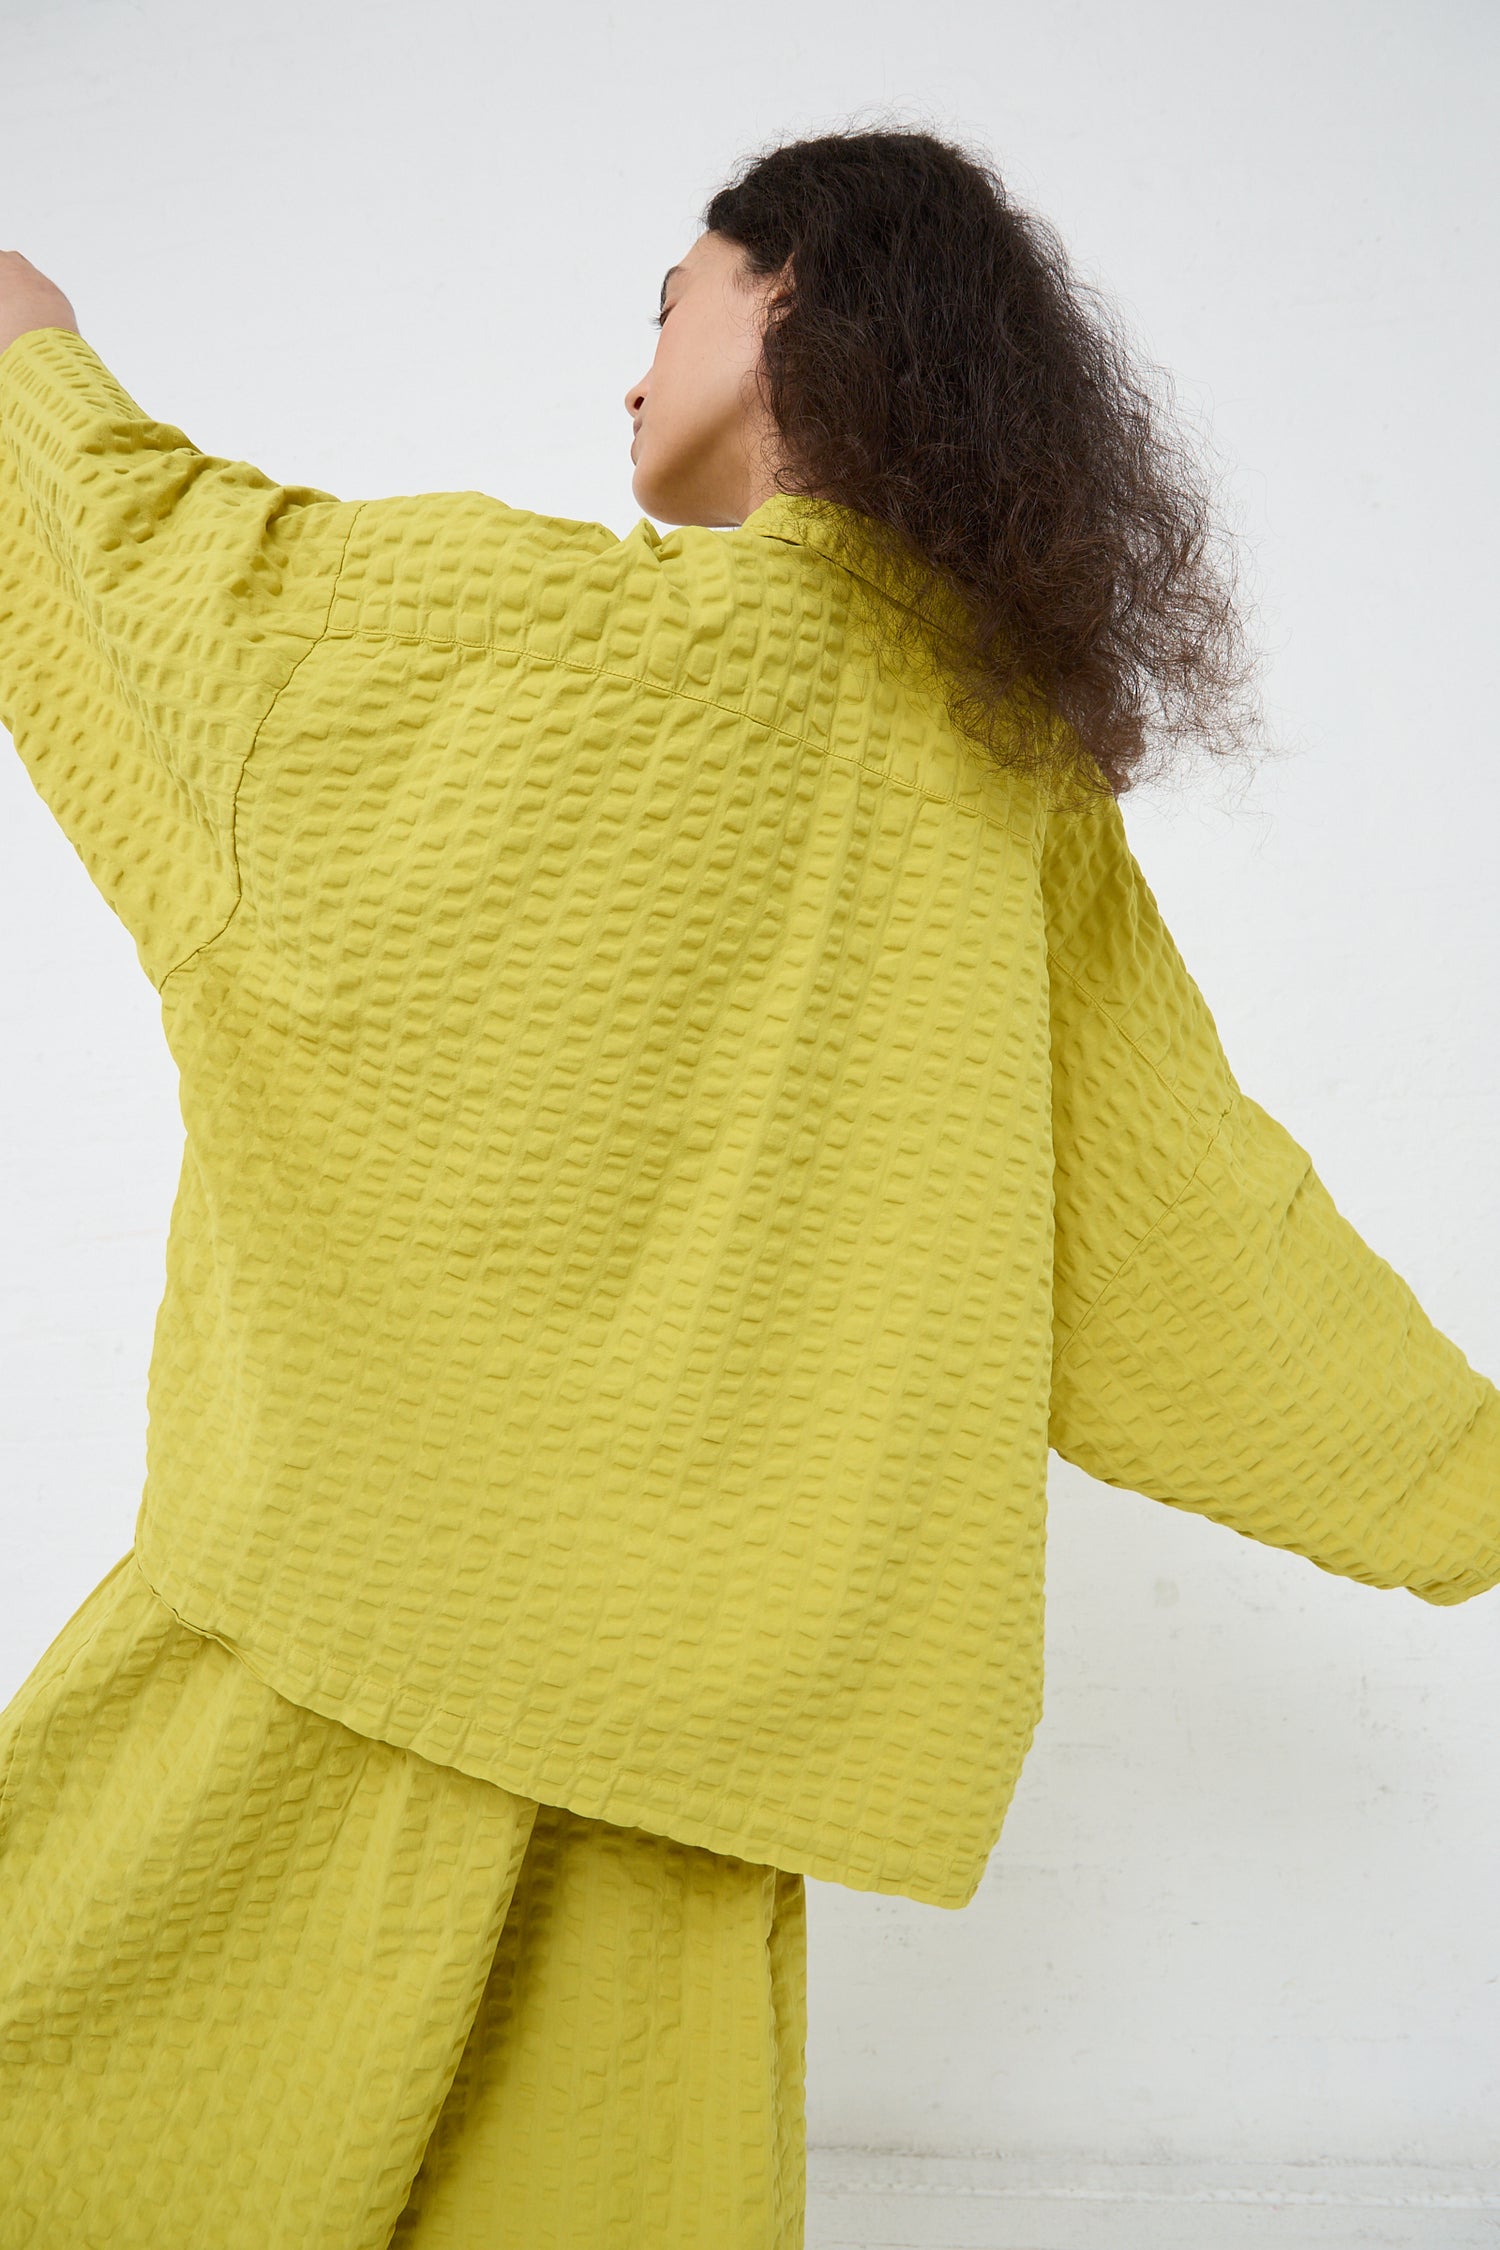 A woman in a Cotton Seersucker Chelsea Collar Shirt in Turmeric by Black Crane, with her back to the camera, looking to one side with her left arm extended outwards.